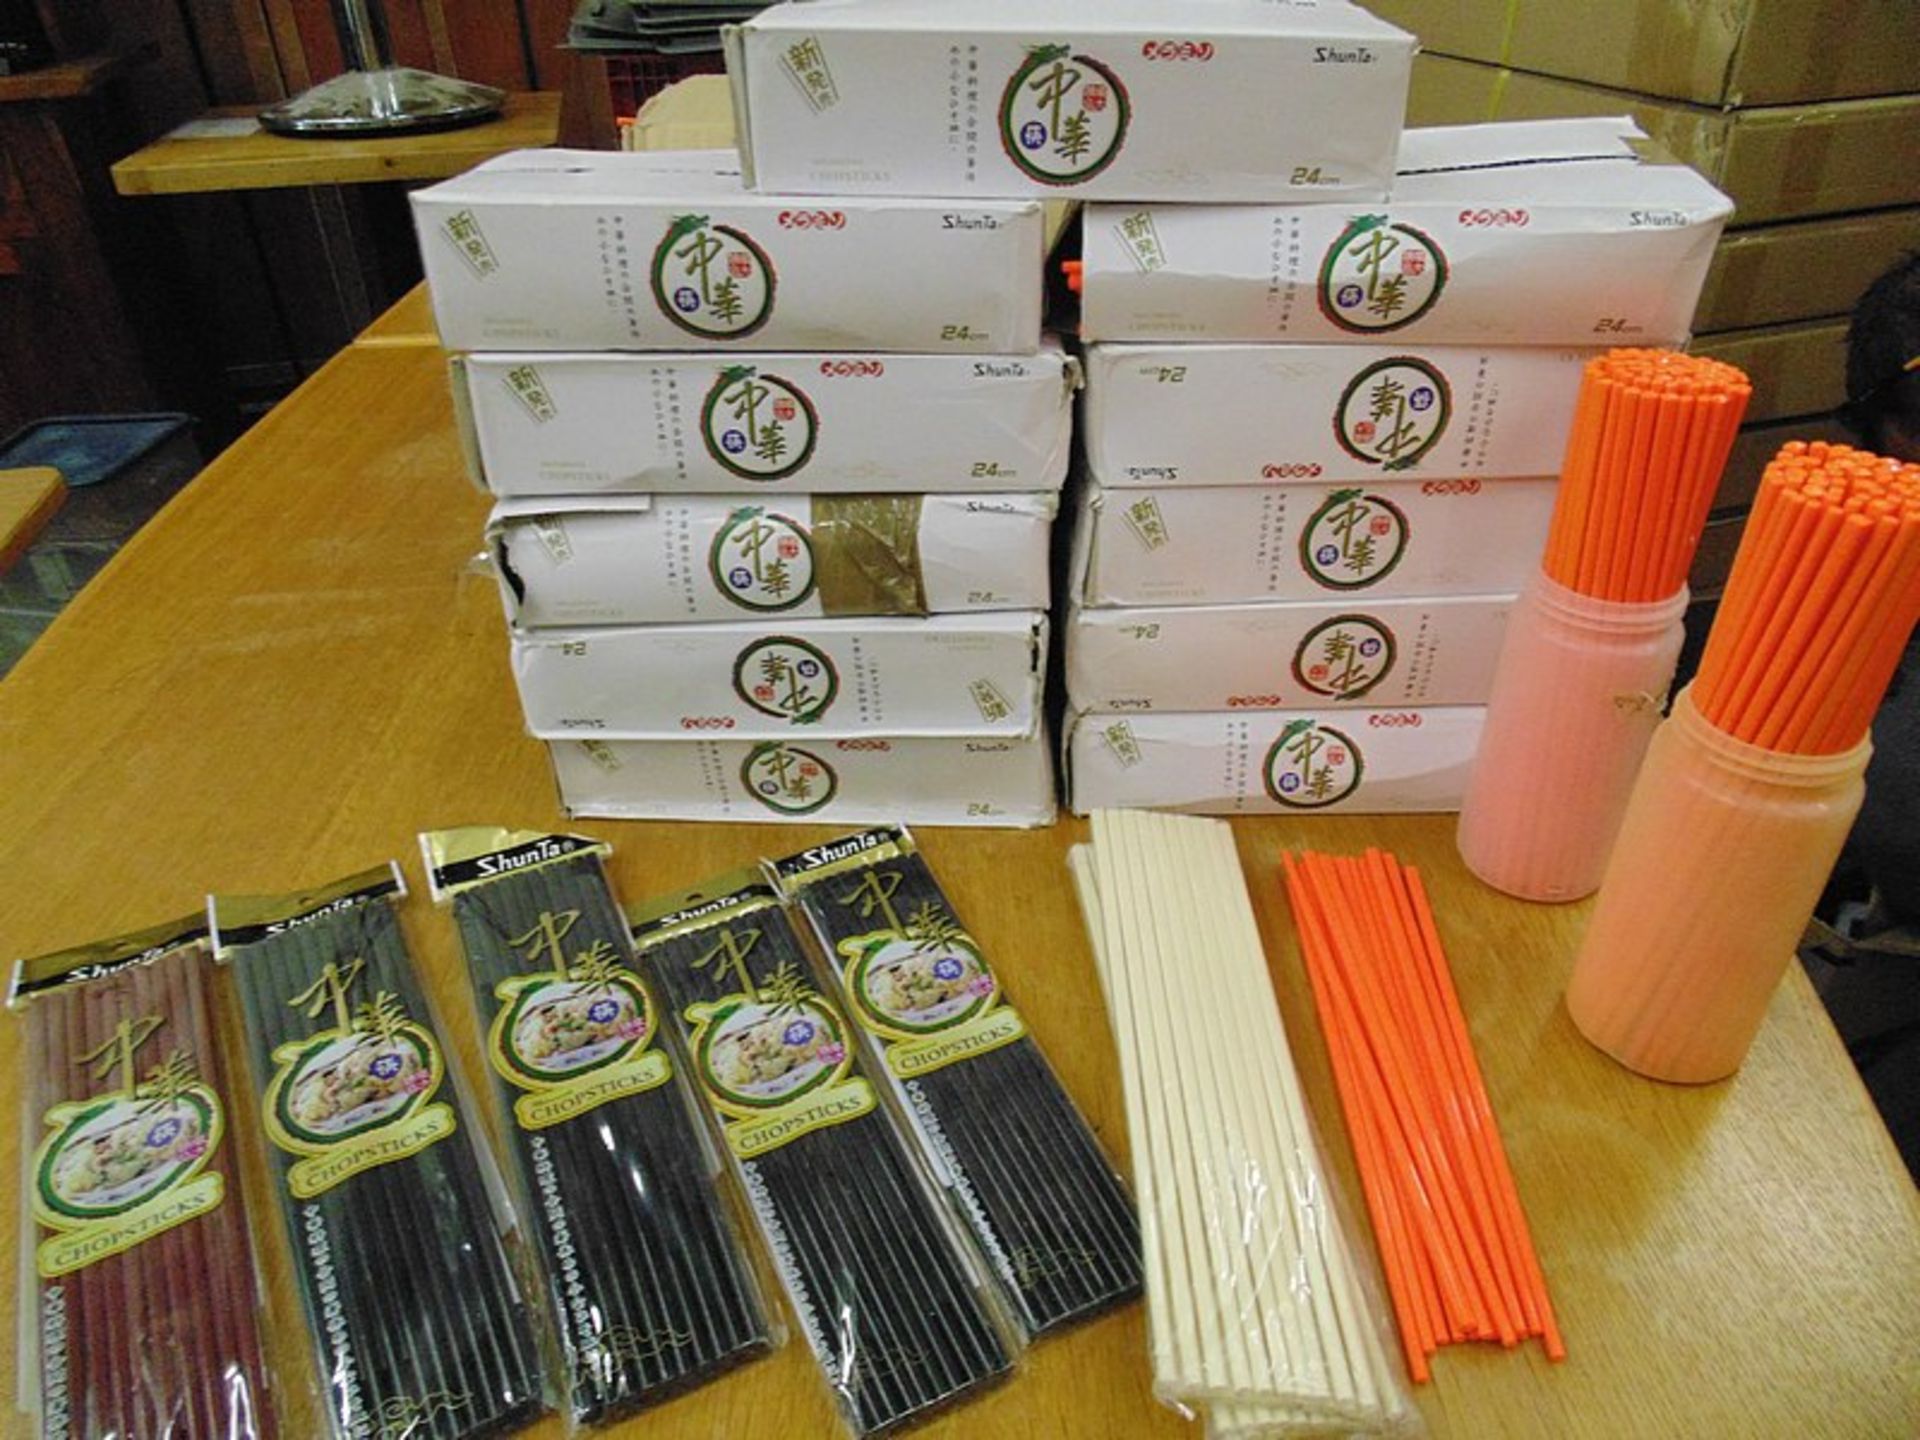 A large quantity of brand new boxed approximately 4000 pairs of orange chop sticks with other